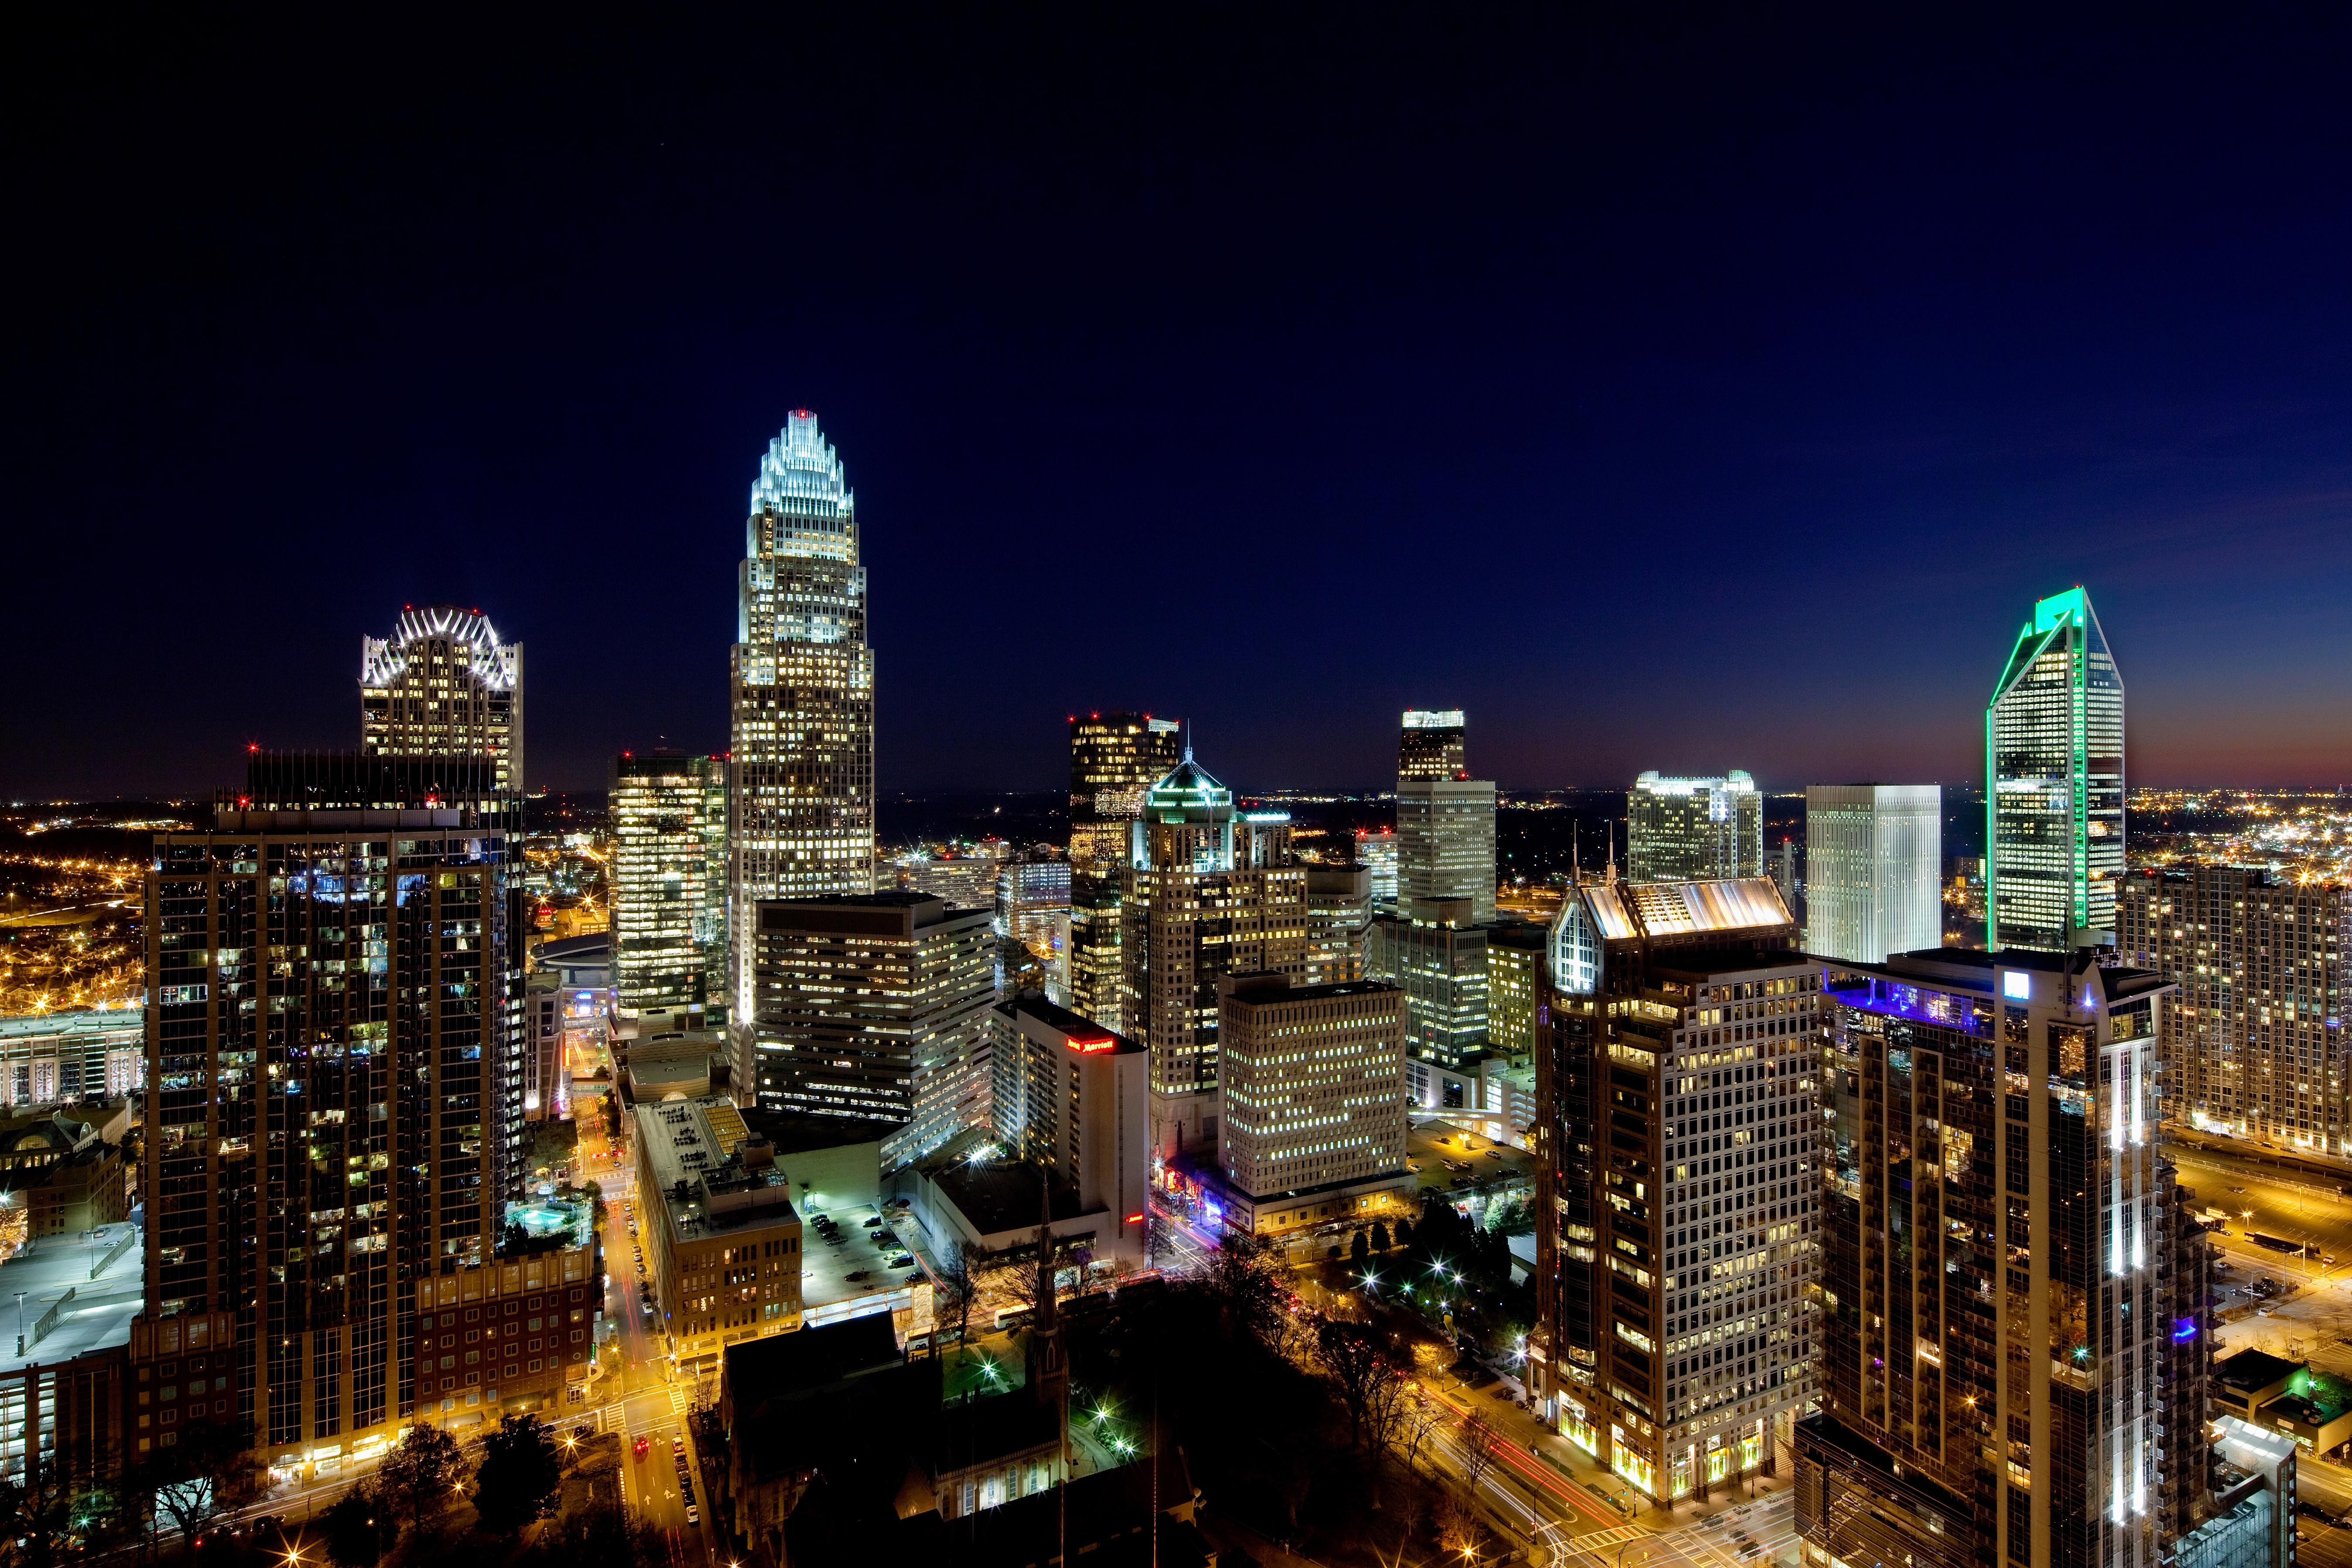 Charlotte, NC | Places I've been | Pinterest | City skylines ...